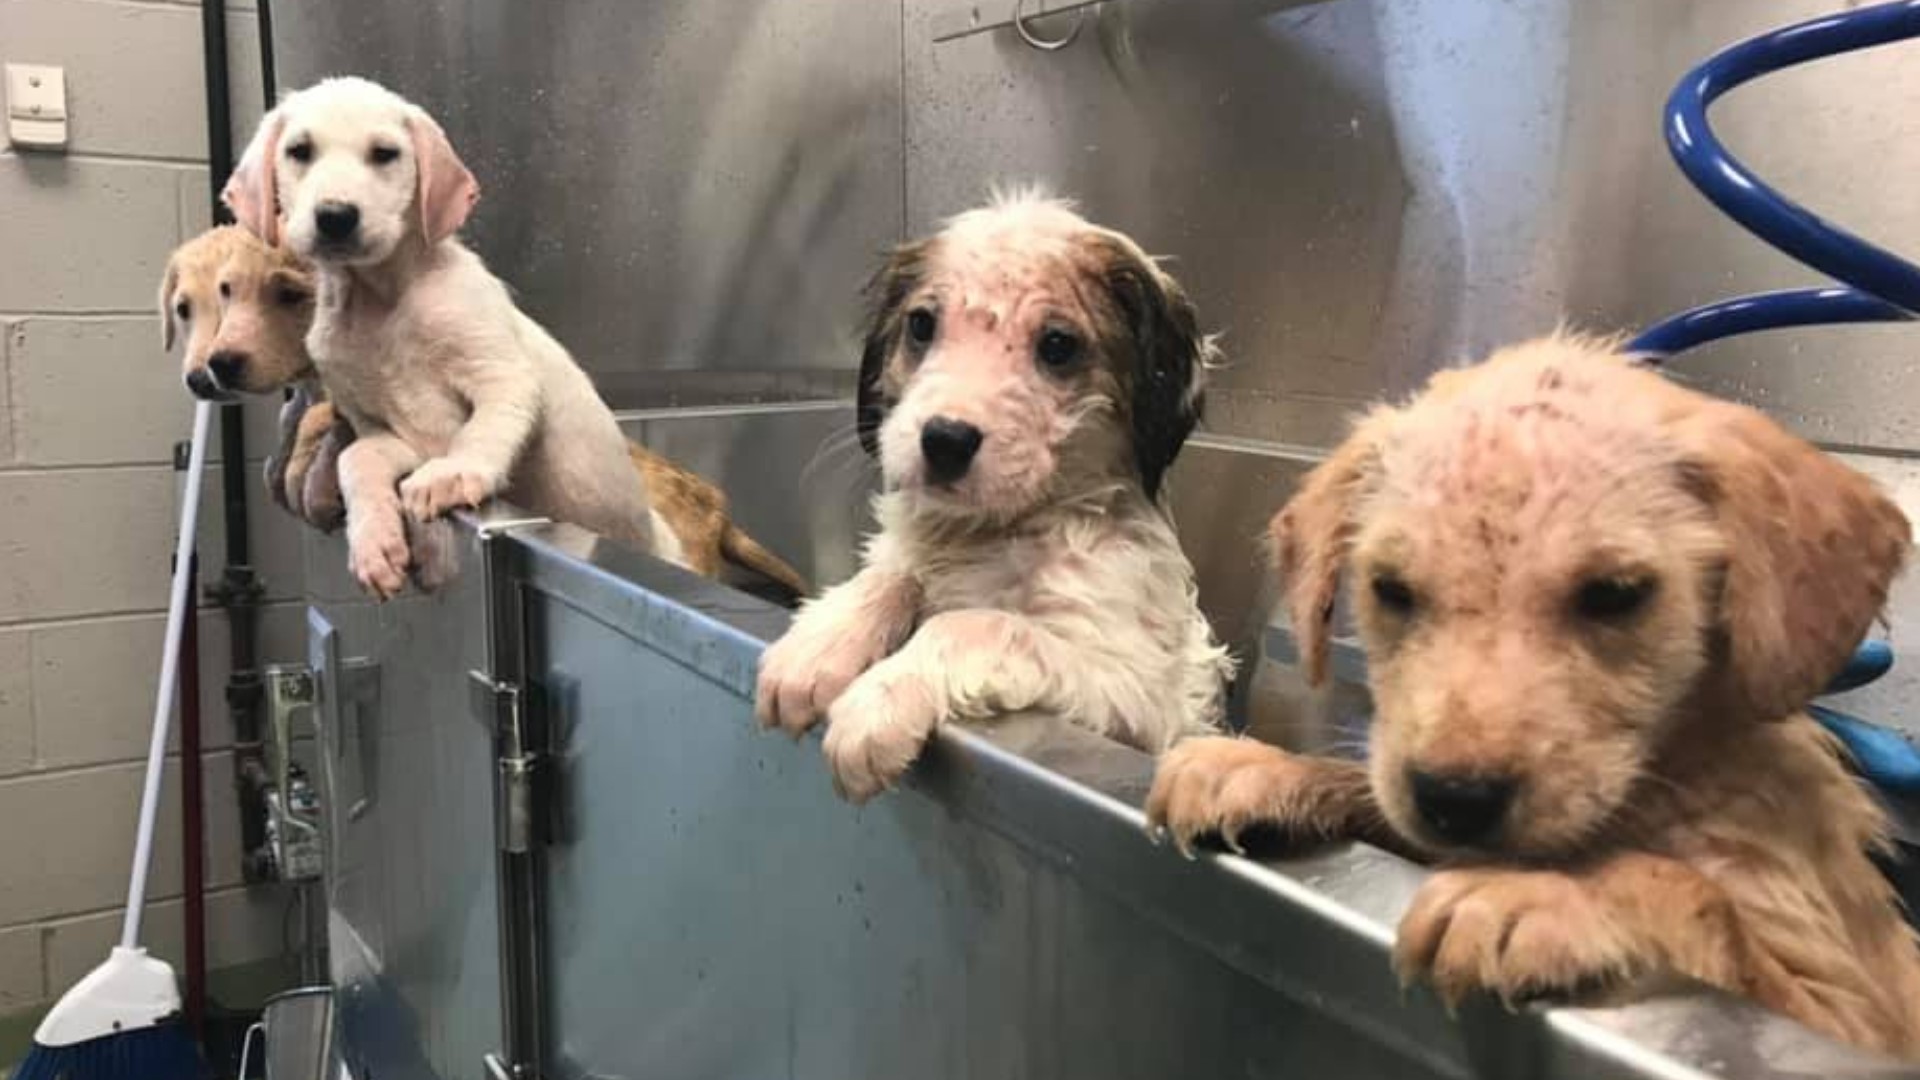 Stray Rescue of St. Louis rescued the puppies, all of which tested positive for both scabies and canine parvovirus.